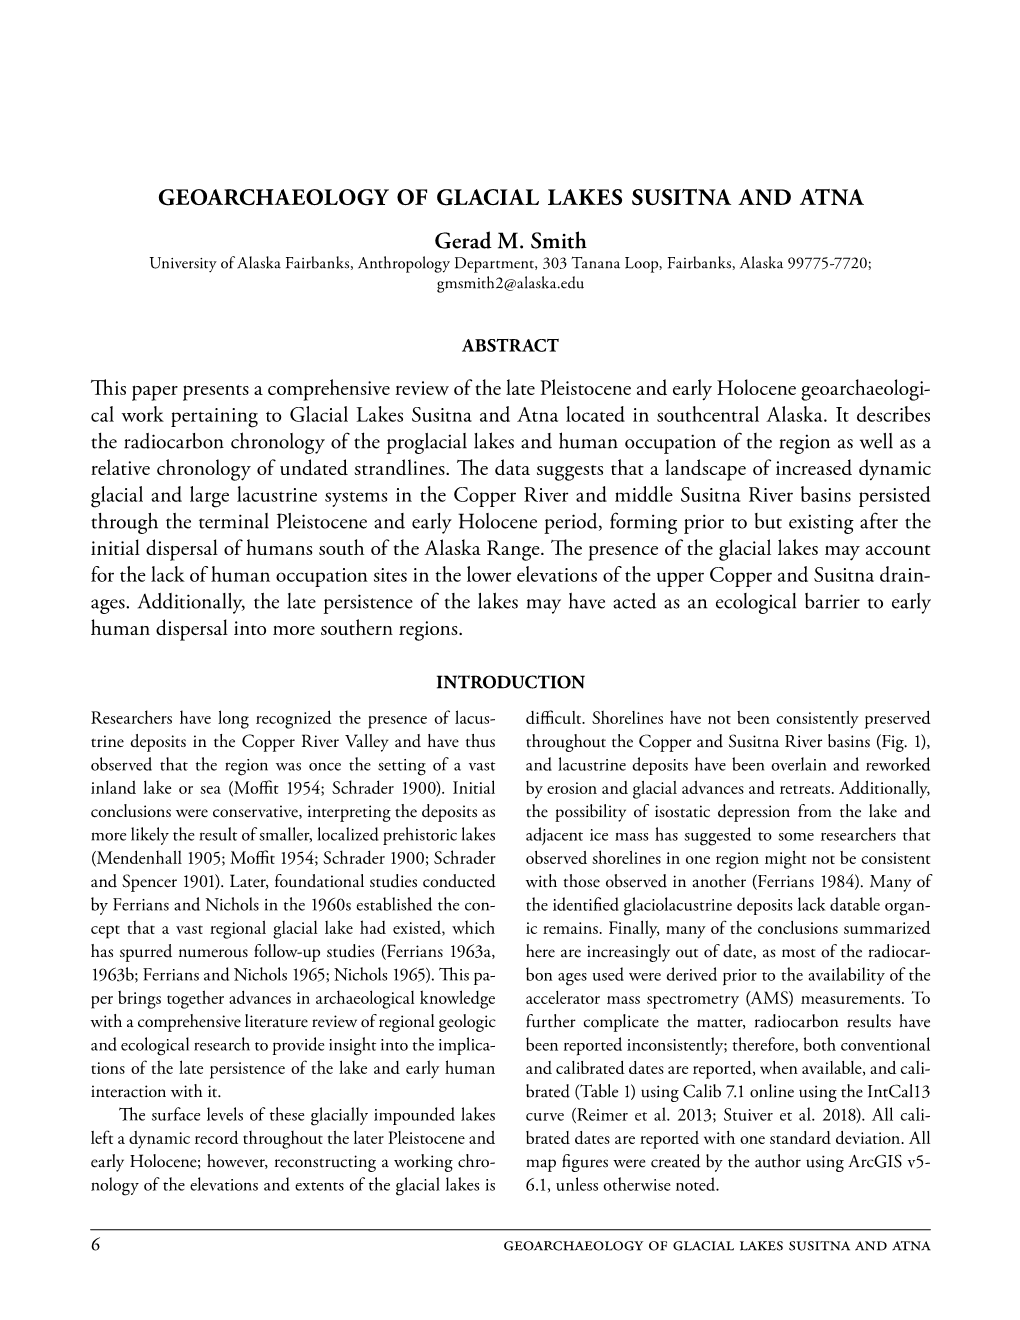 Geoarchaeology of Glacial Lakes Susitna and Atna Gerad M